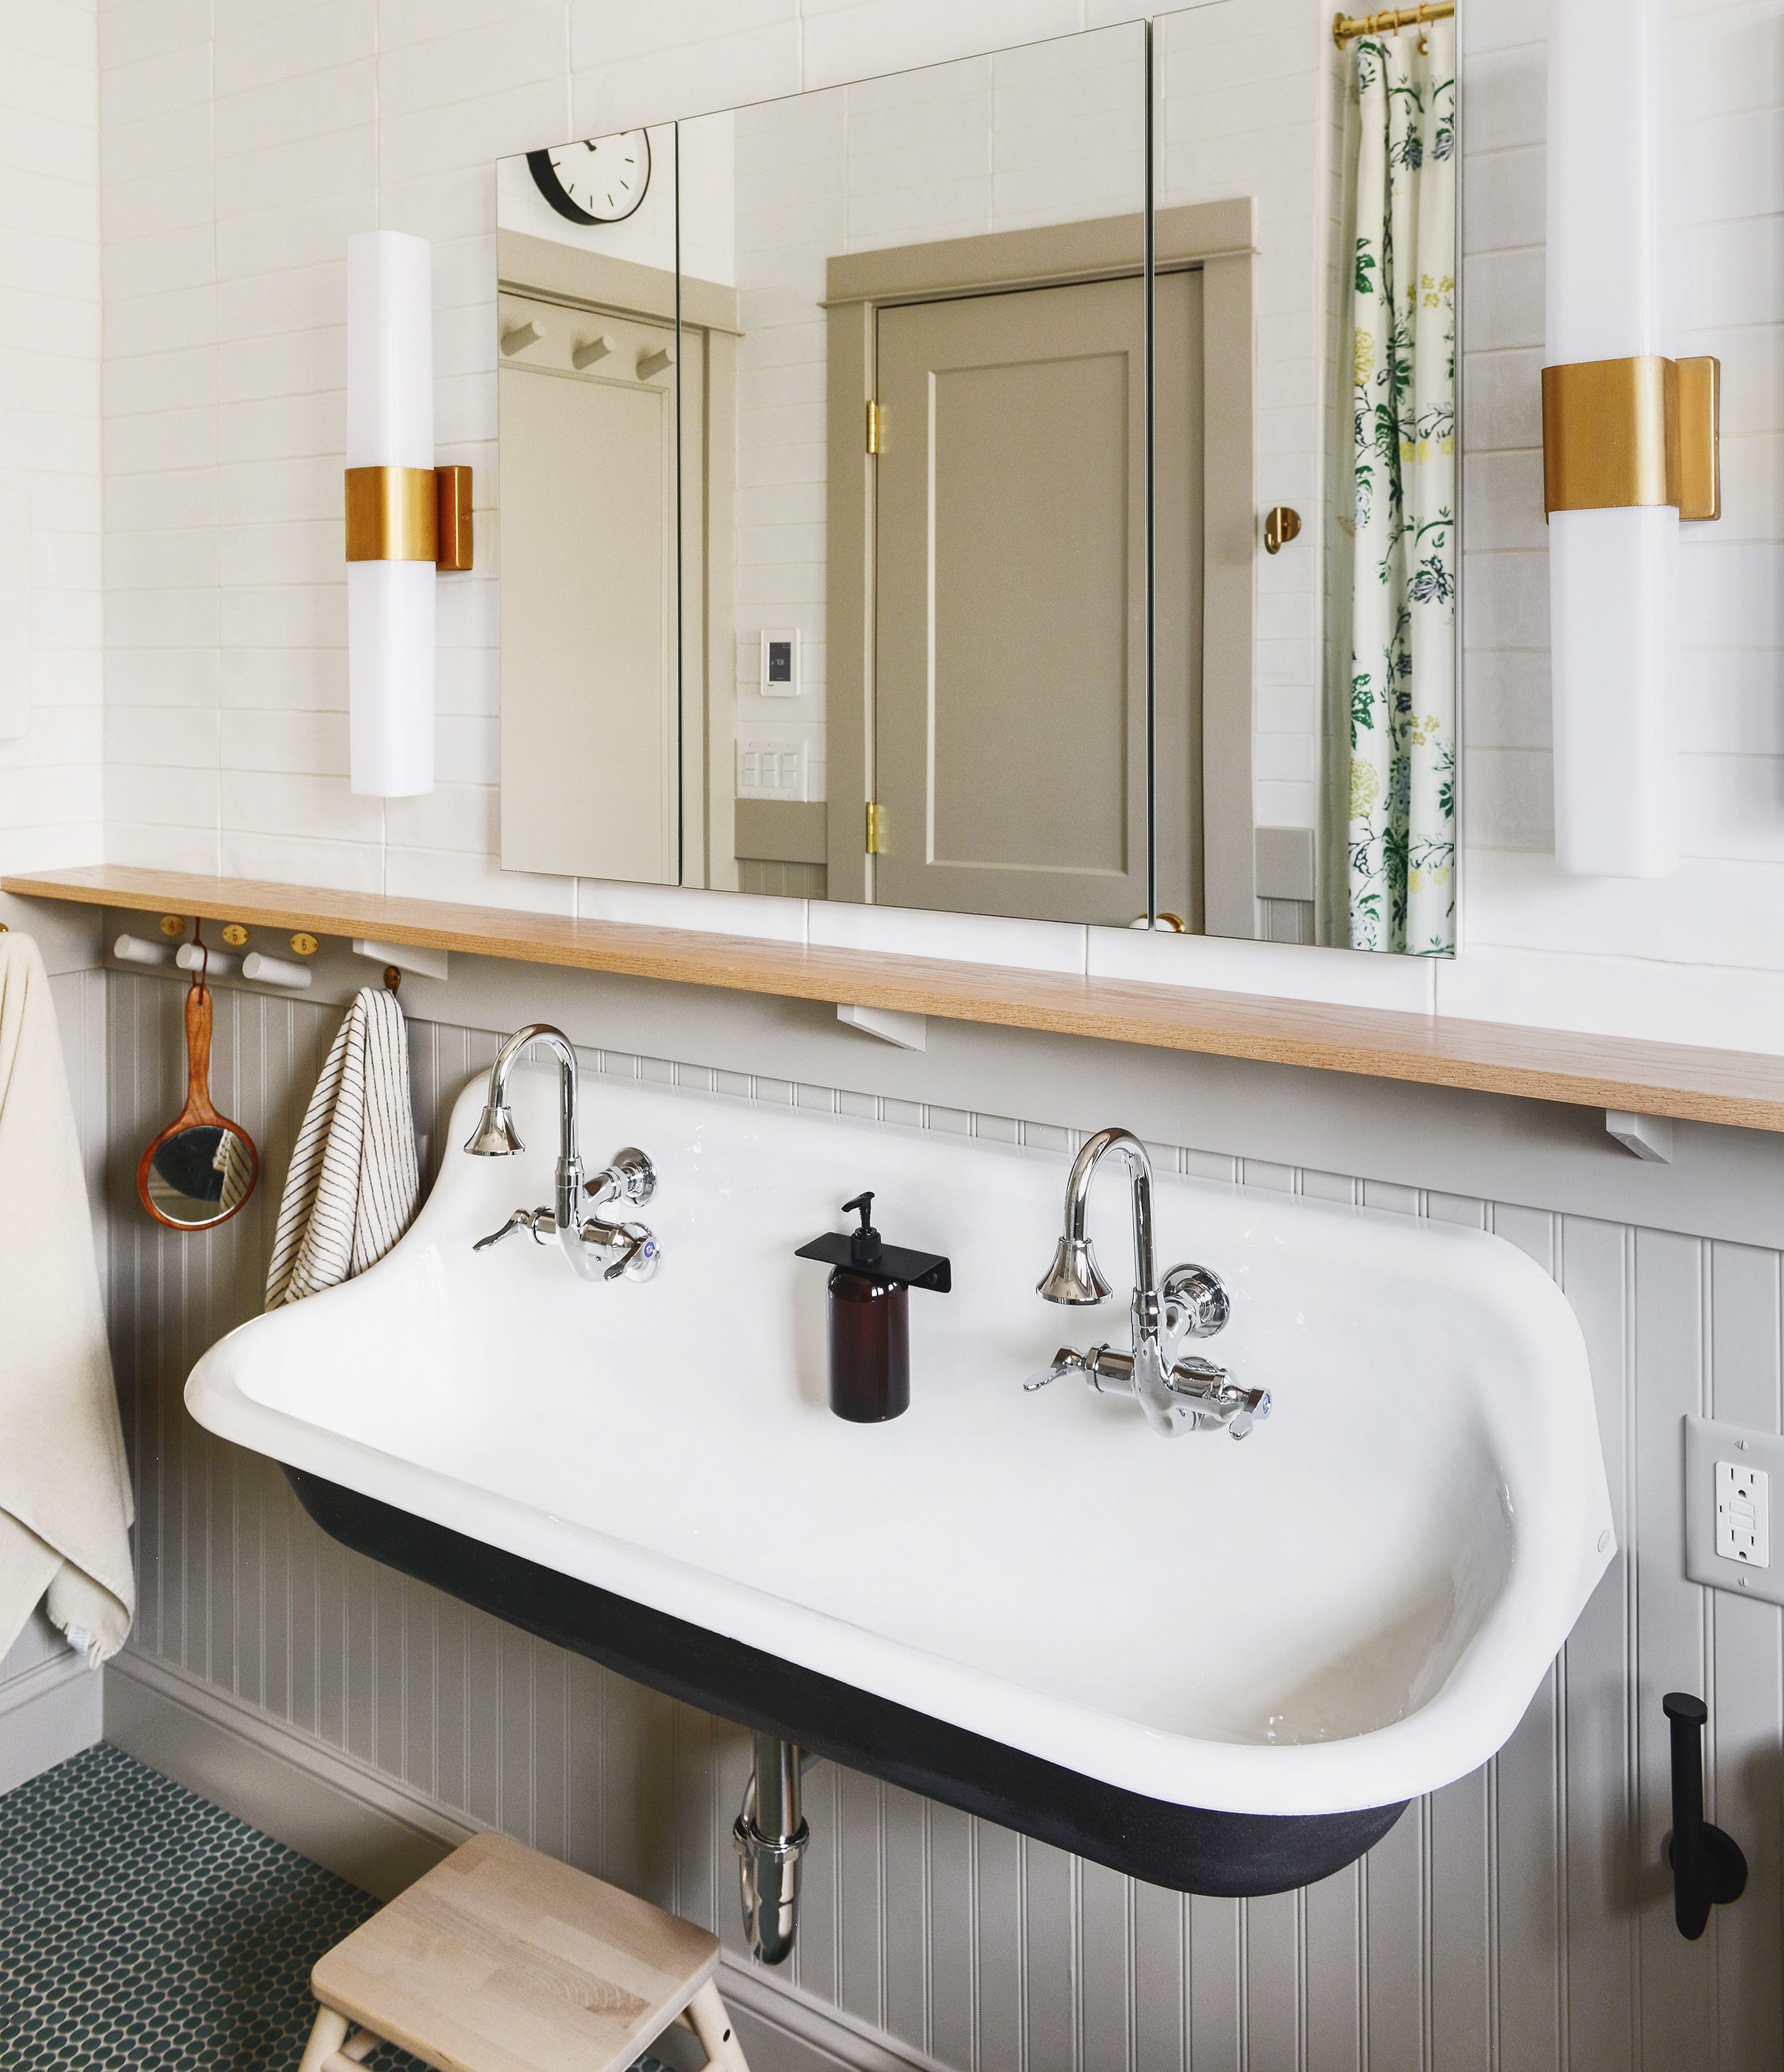 Our neutral bathroom with Kohler Brockway sink and large medicine cabinet, brass sconces and beadboard wall treatment | via Yellow Brick Home